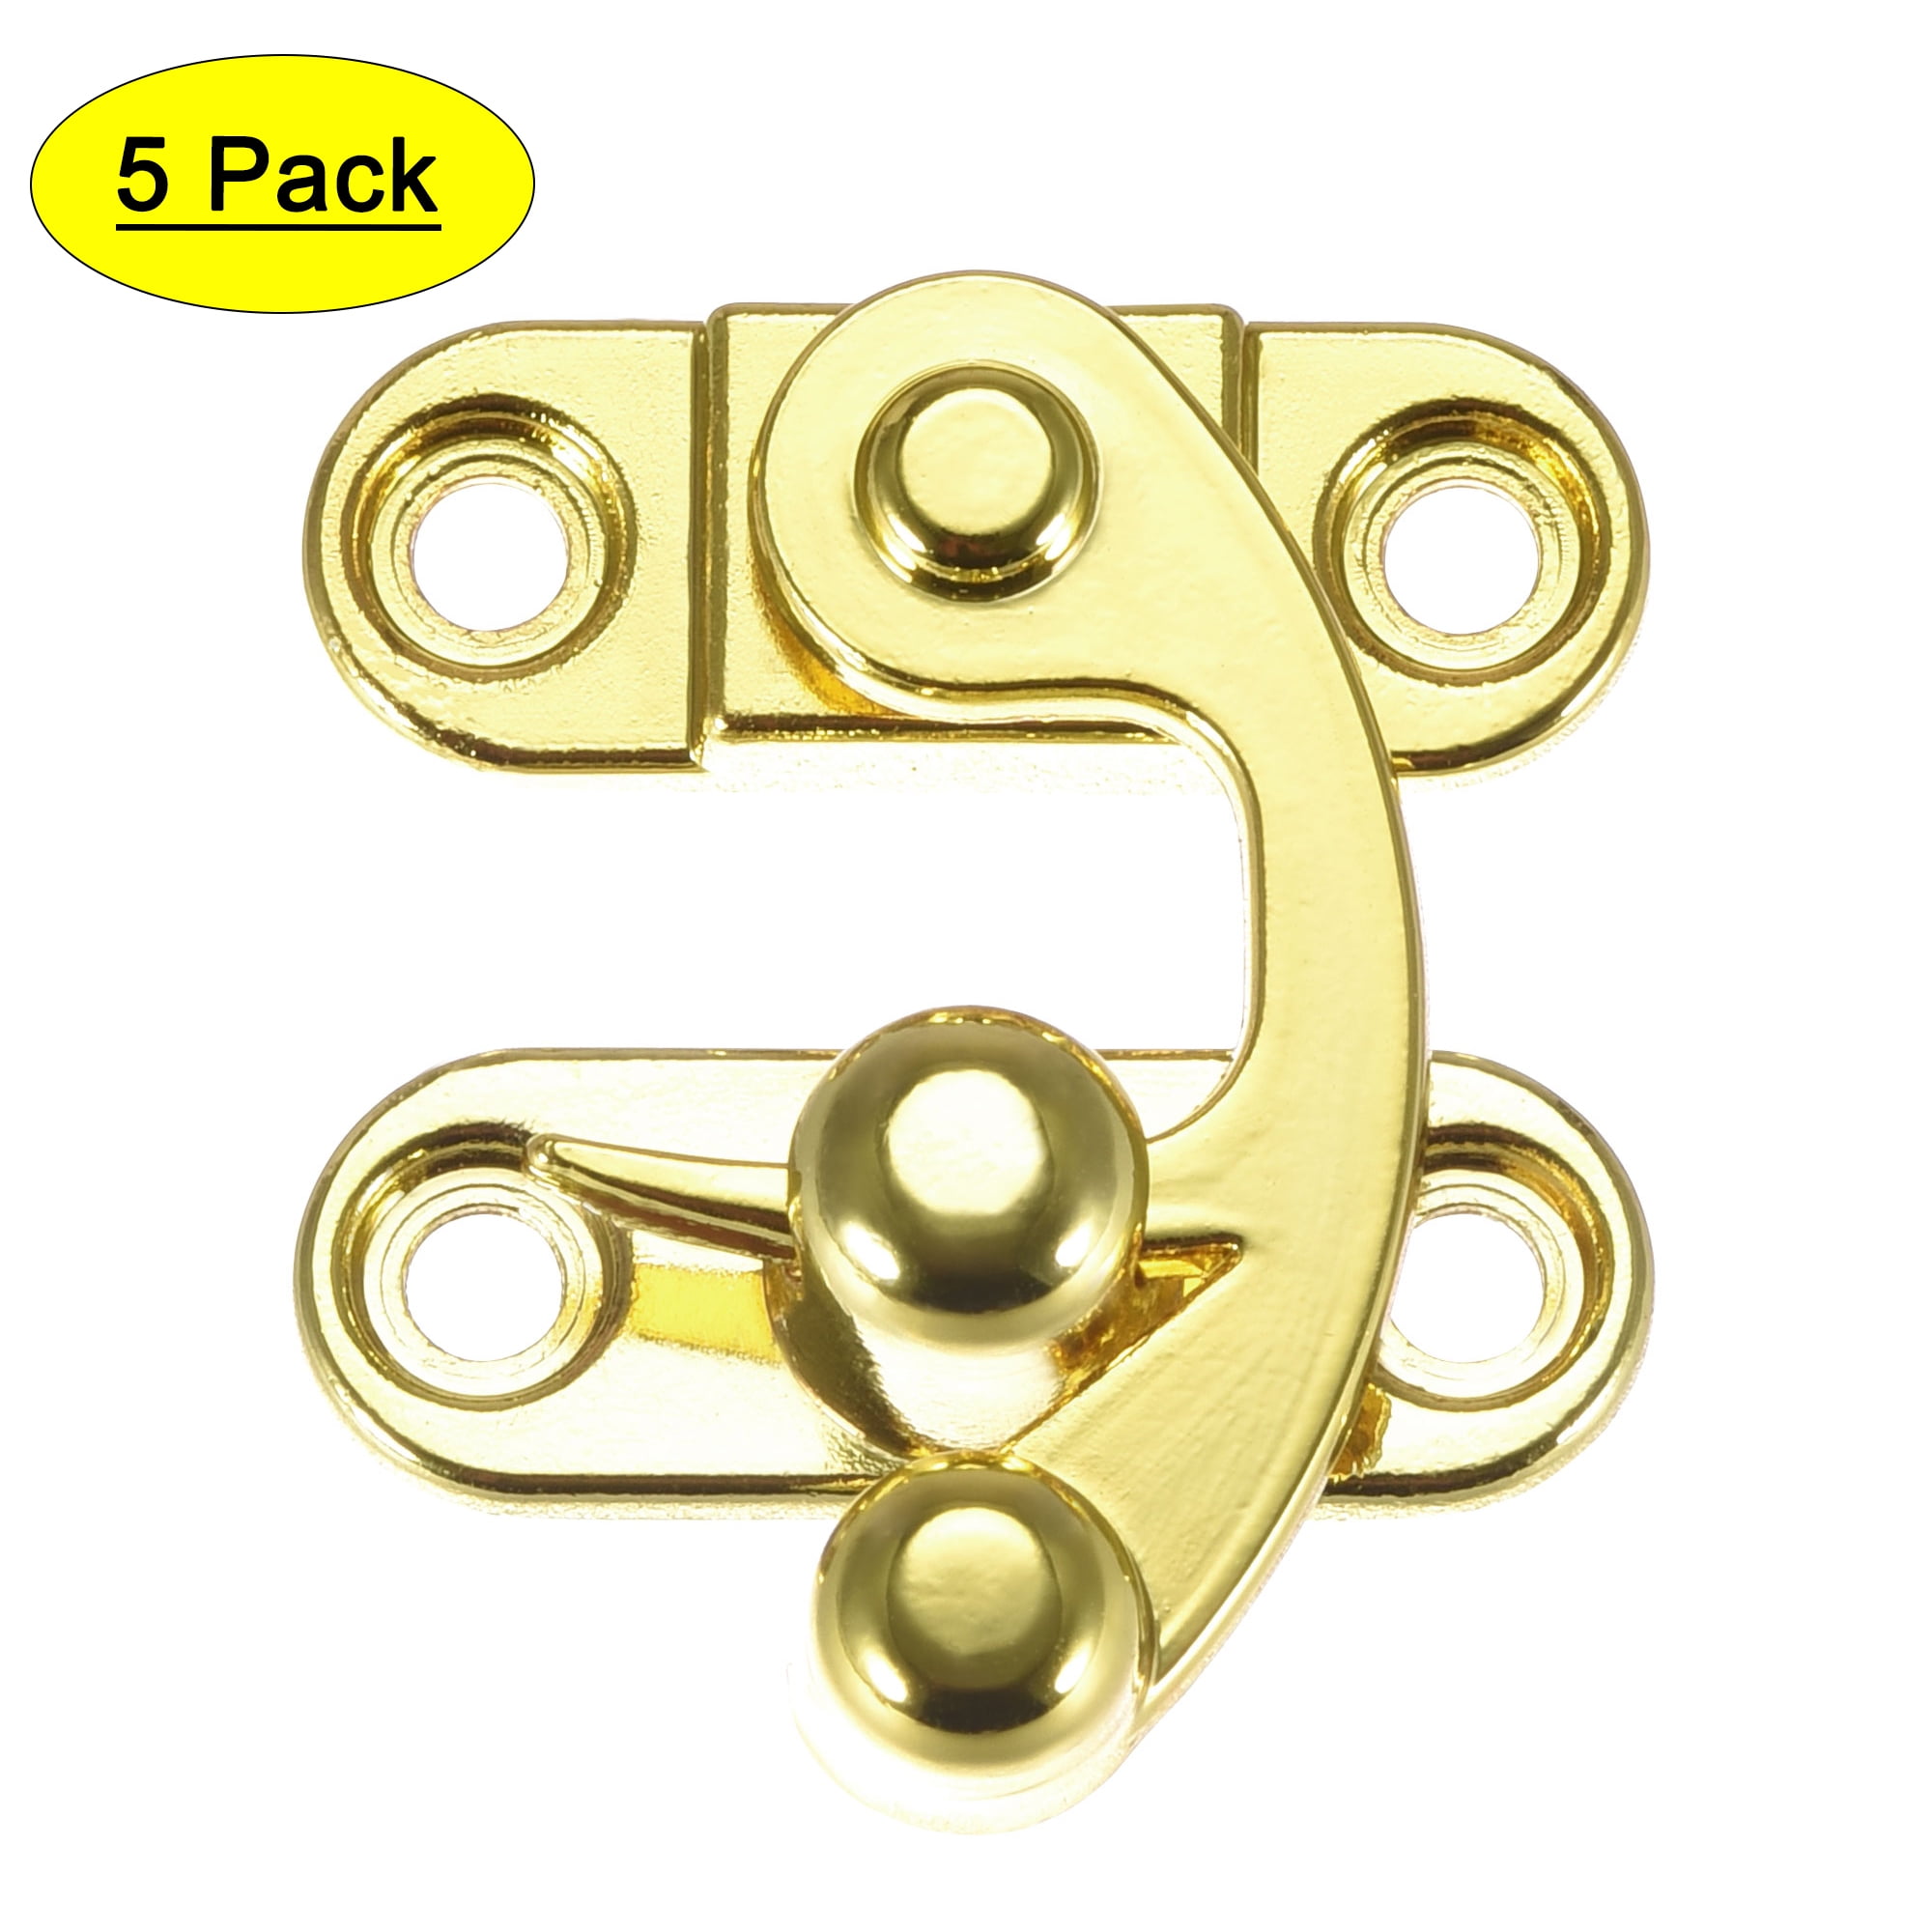 Uxcell Lock Clasp Right Latch Hook Hasp 1.3x1.1 inch Swing Arm Latch Gold  Tone 5Pcs 